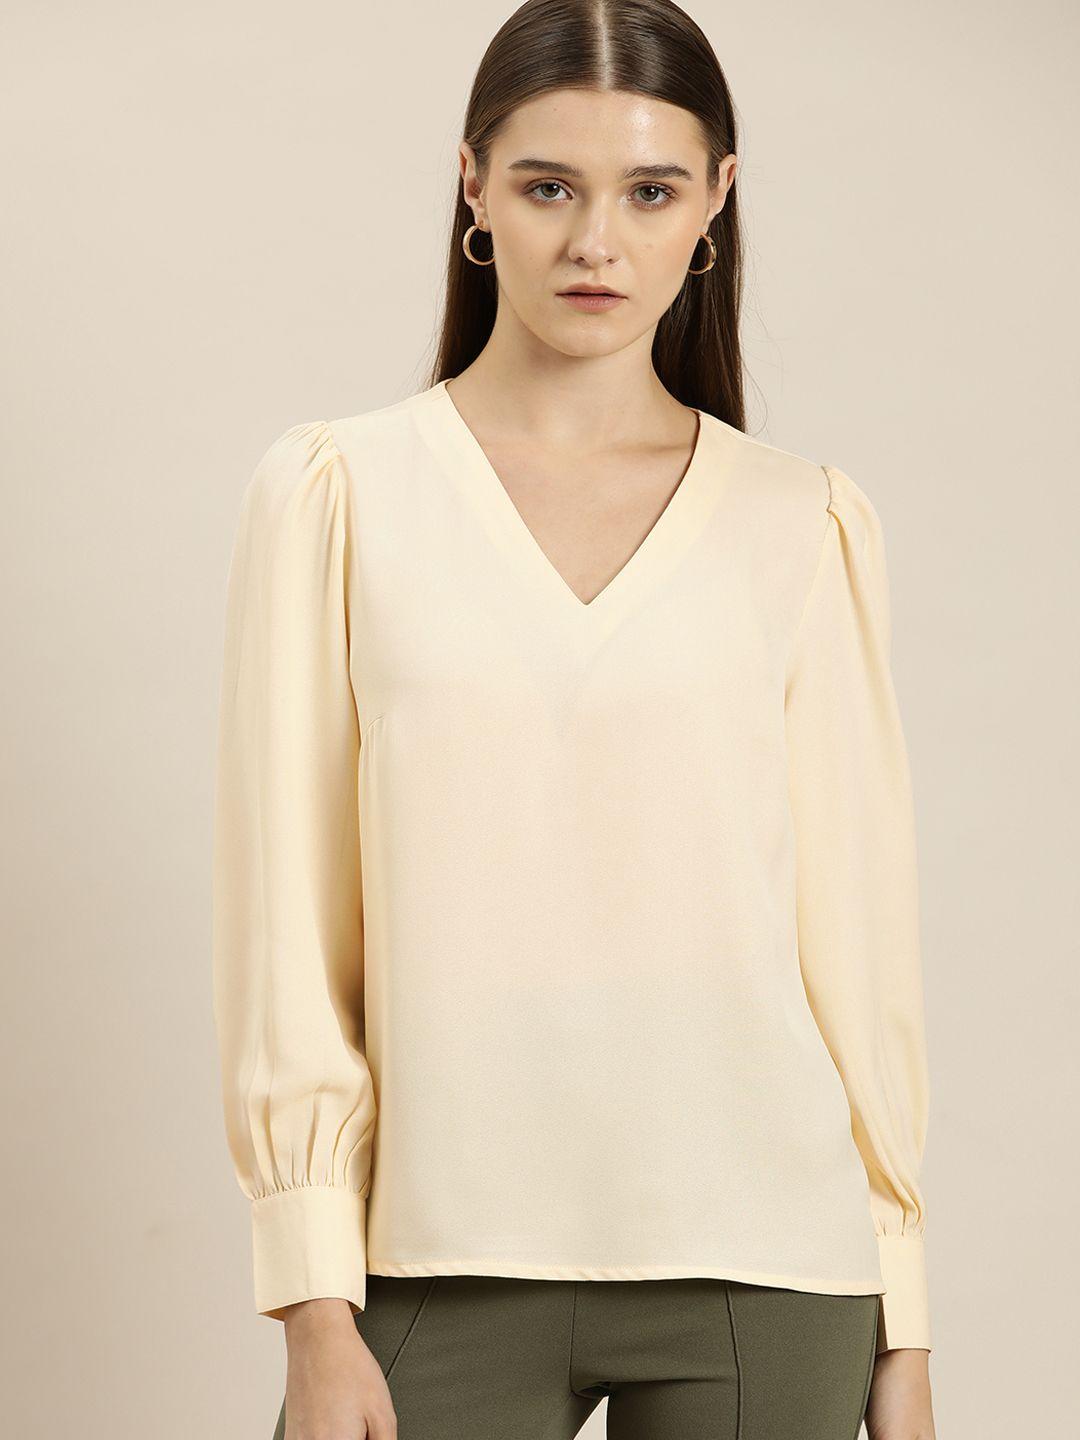 her-by-invictus-puff-sleeves-regular-v-neck-top